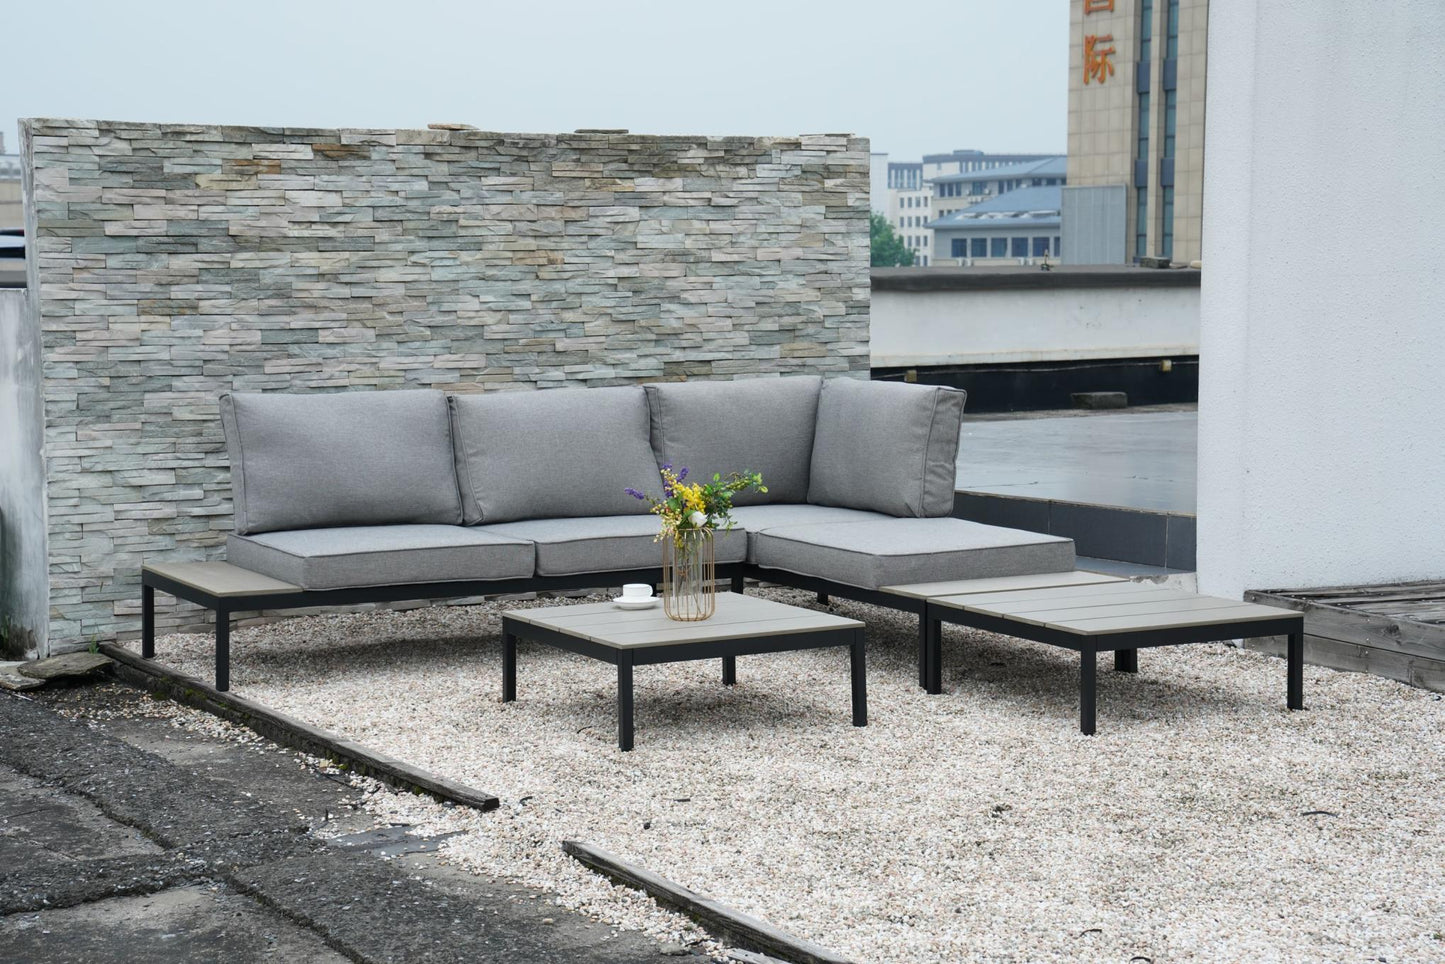 4 Piece Outdoor Sectional Sofa Set with Cushion & Built-in Side Table